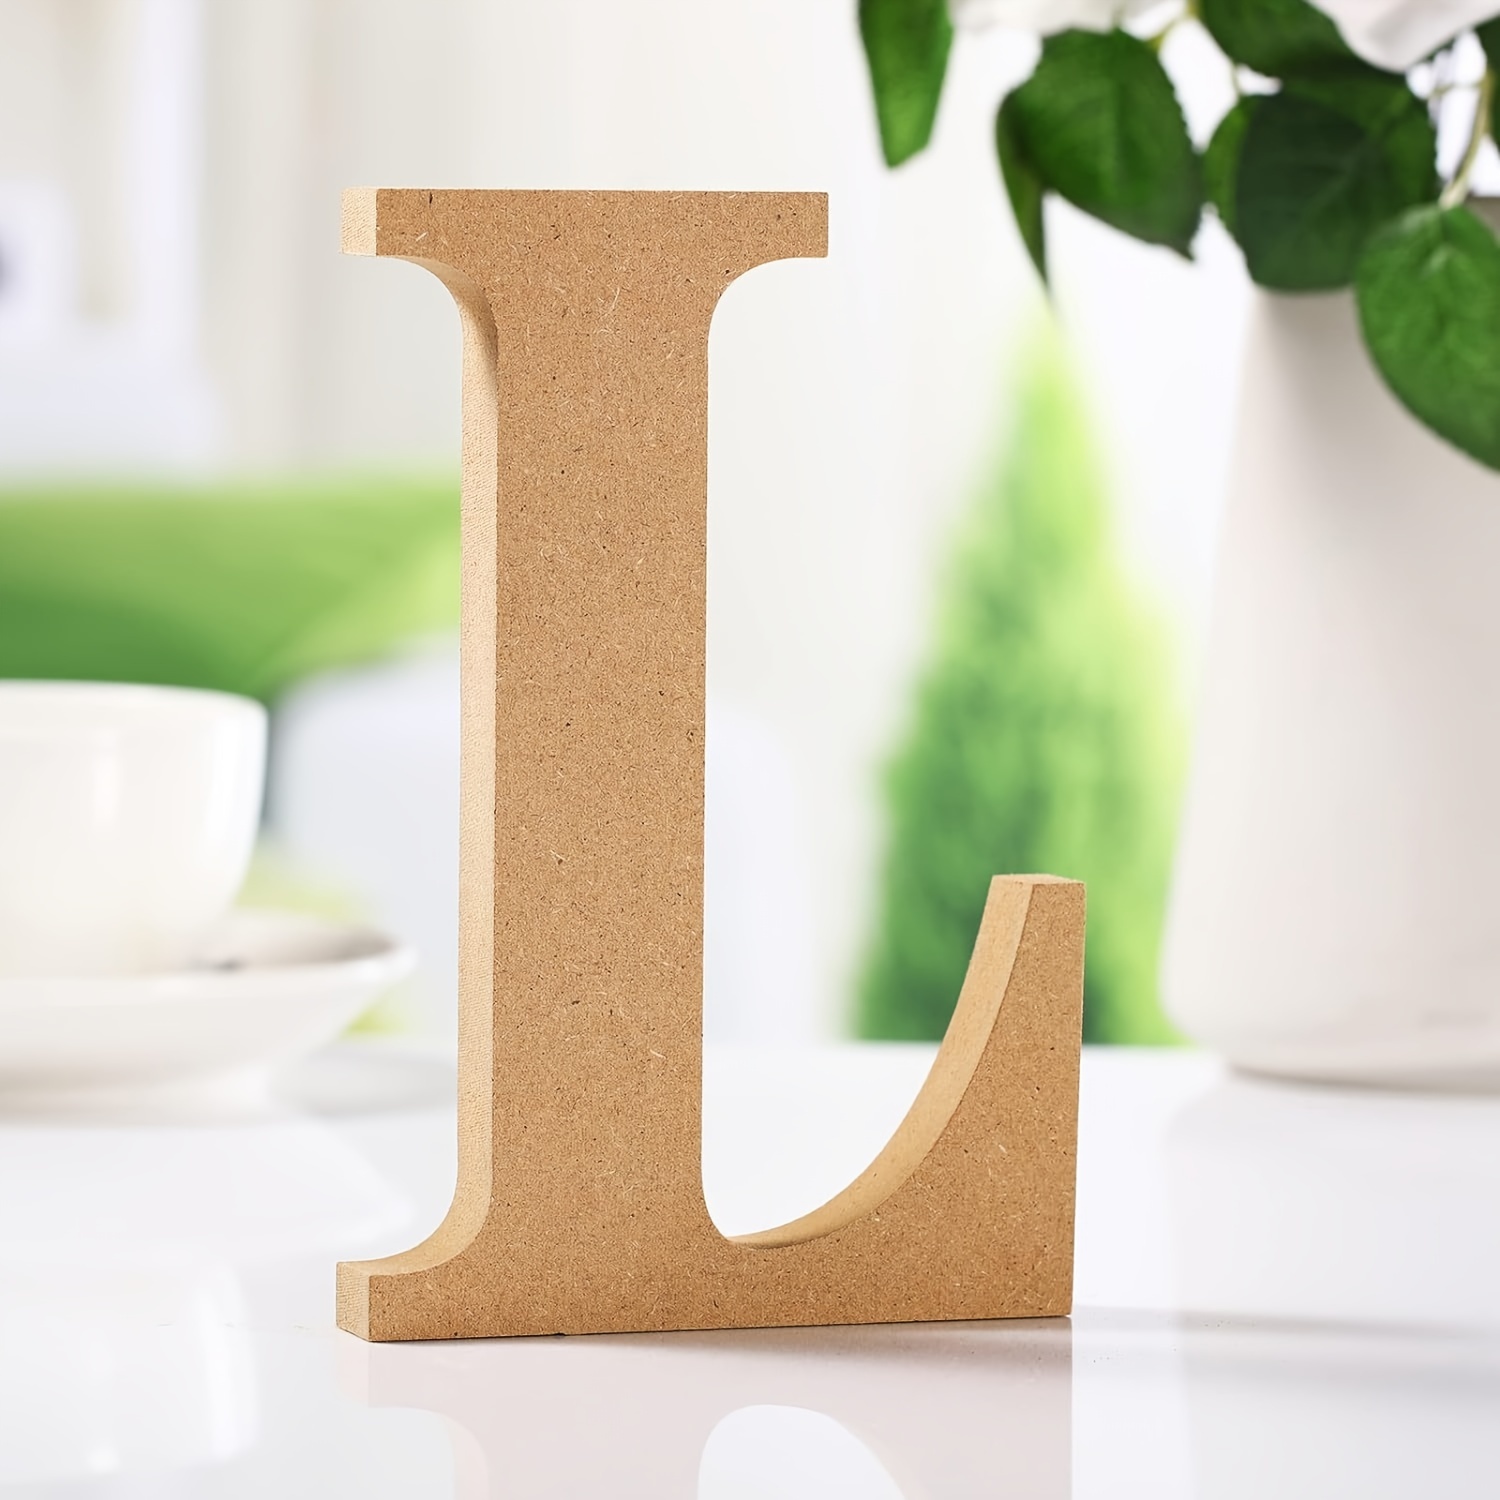 2-Inch Decorative Wooden Letter D - Alphabet Letters for DIY Wall Signs,  Table & Shelf Decorations - Wood Letters for Crafts & Party Decor